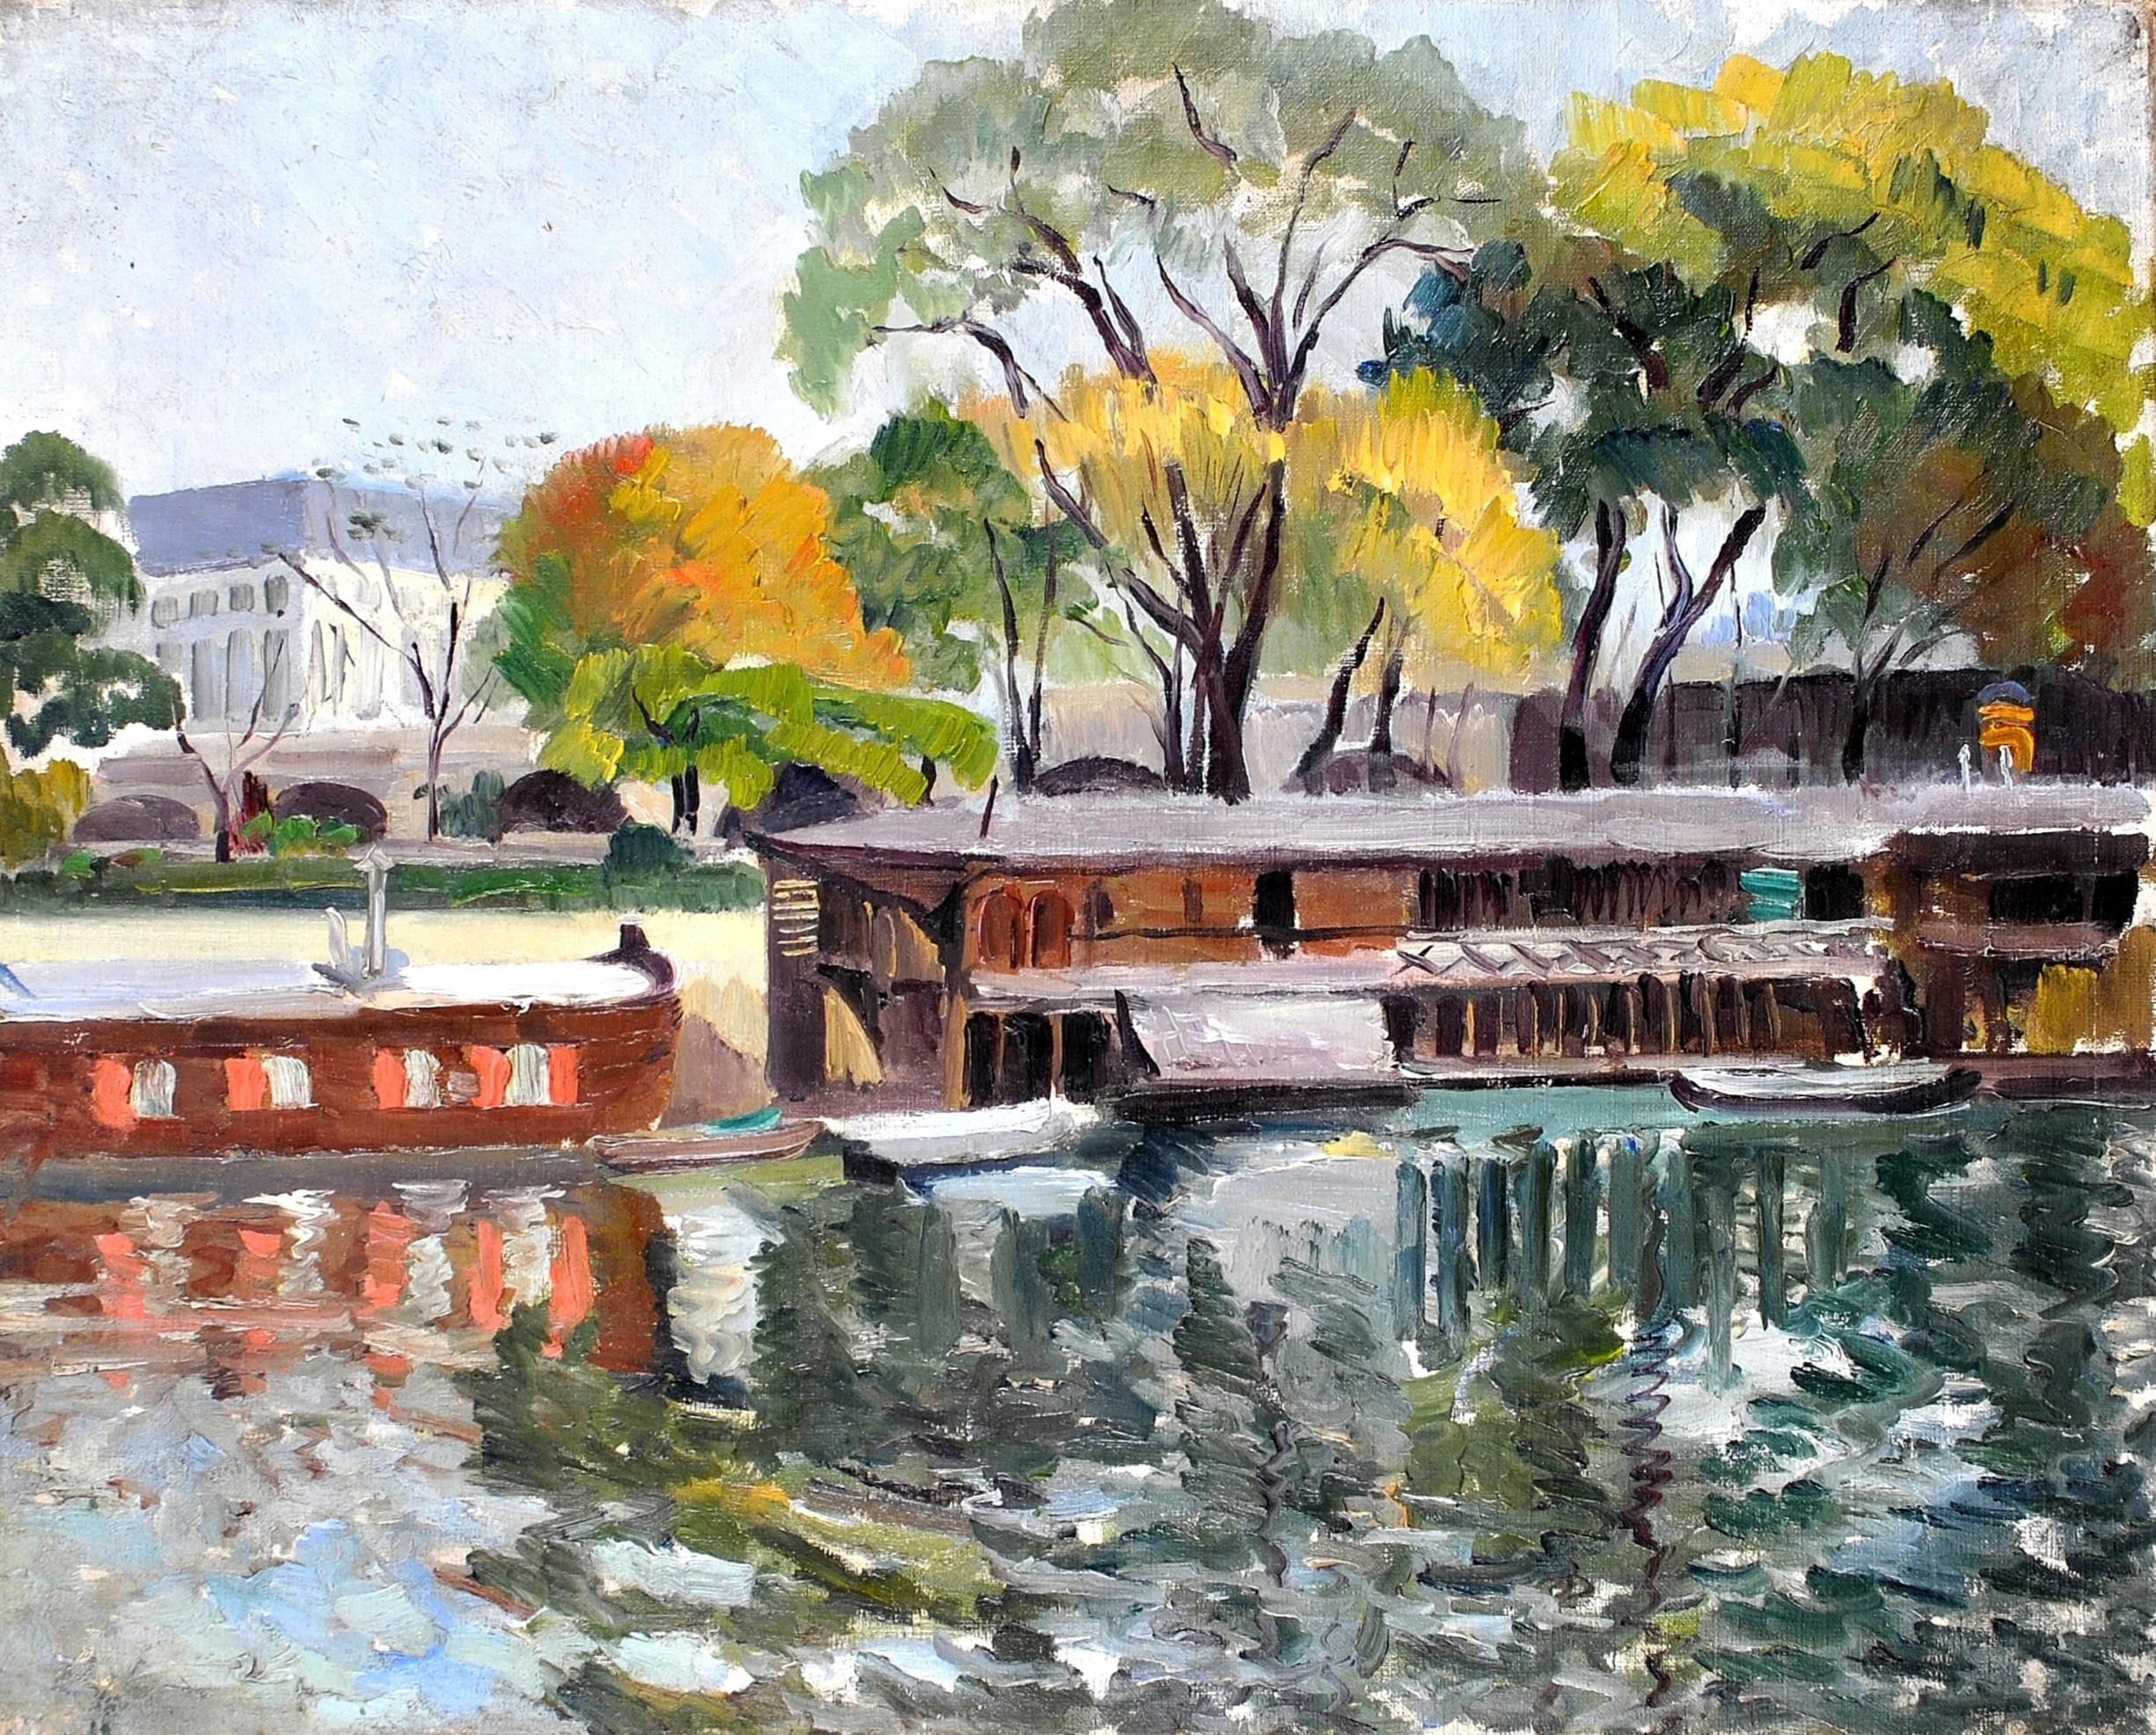 A beautiful mid 20th century French impressionist oil on canvas depicting moored boats on a river. Highly atmospheric original French oil on canvas, which has been very well painted with fast, colourful brushstrokes. Finished in the original simple